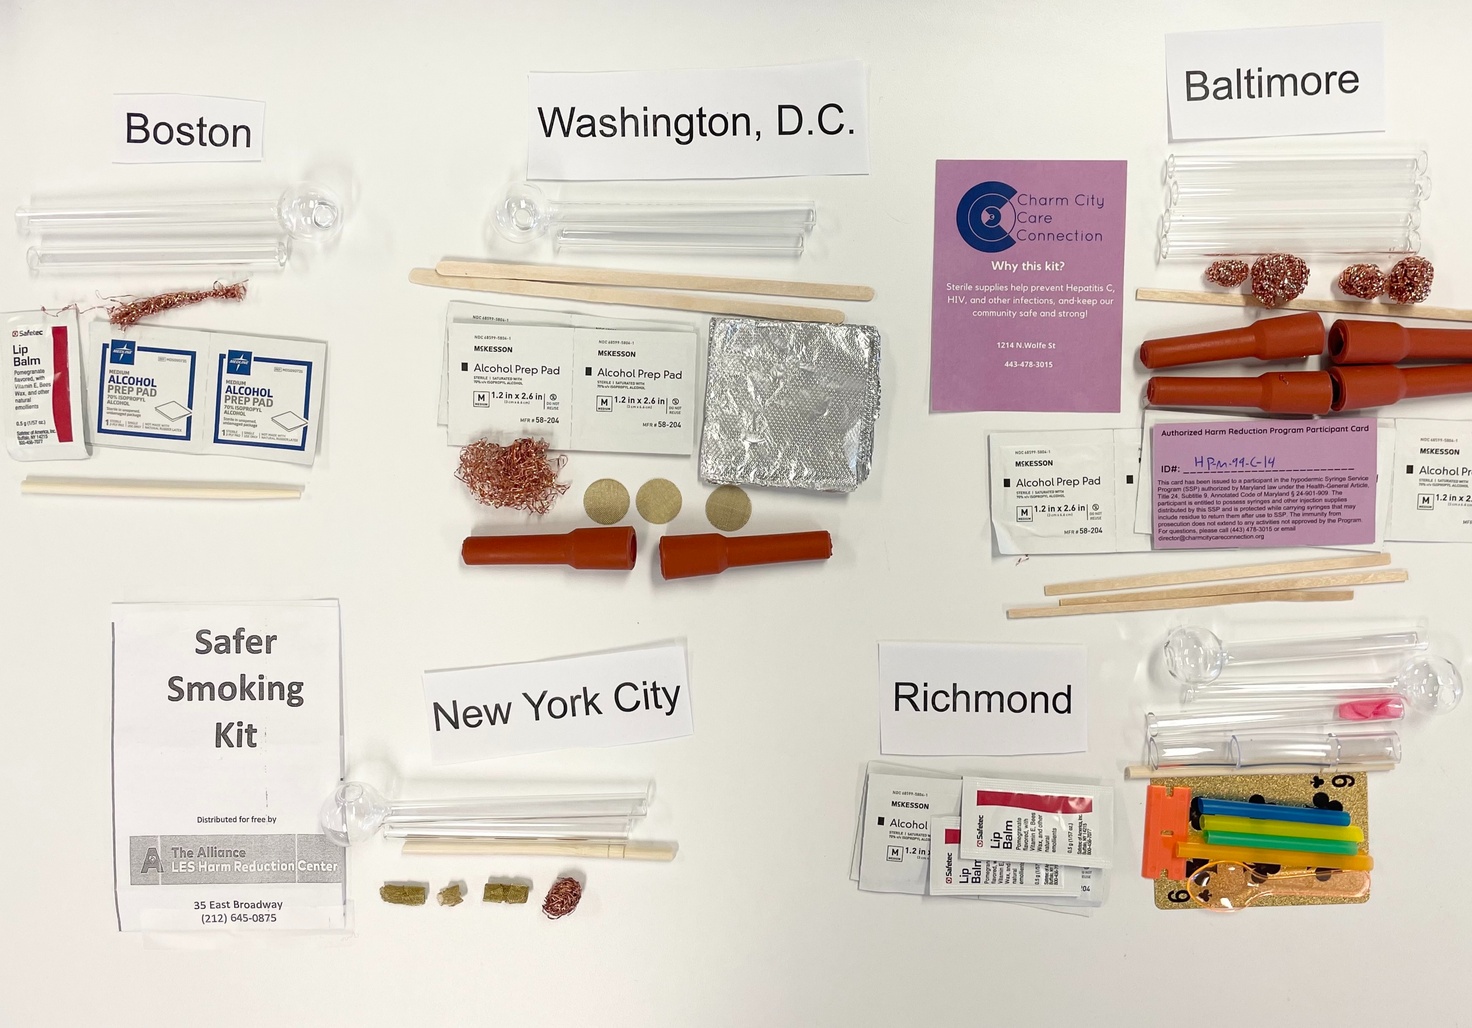 Harm Reduction Safer Injection Kit - iknowmine